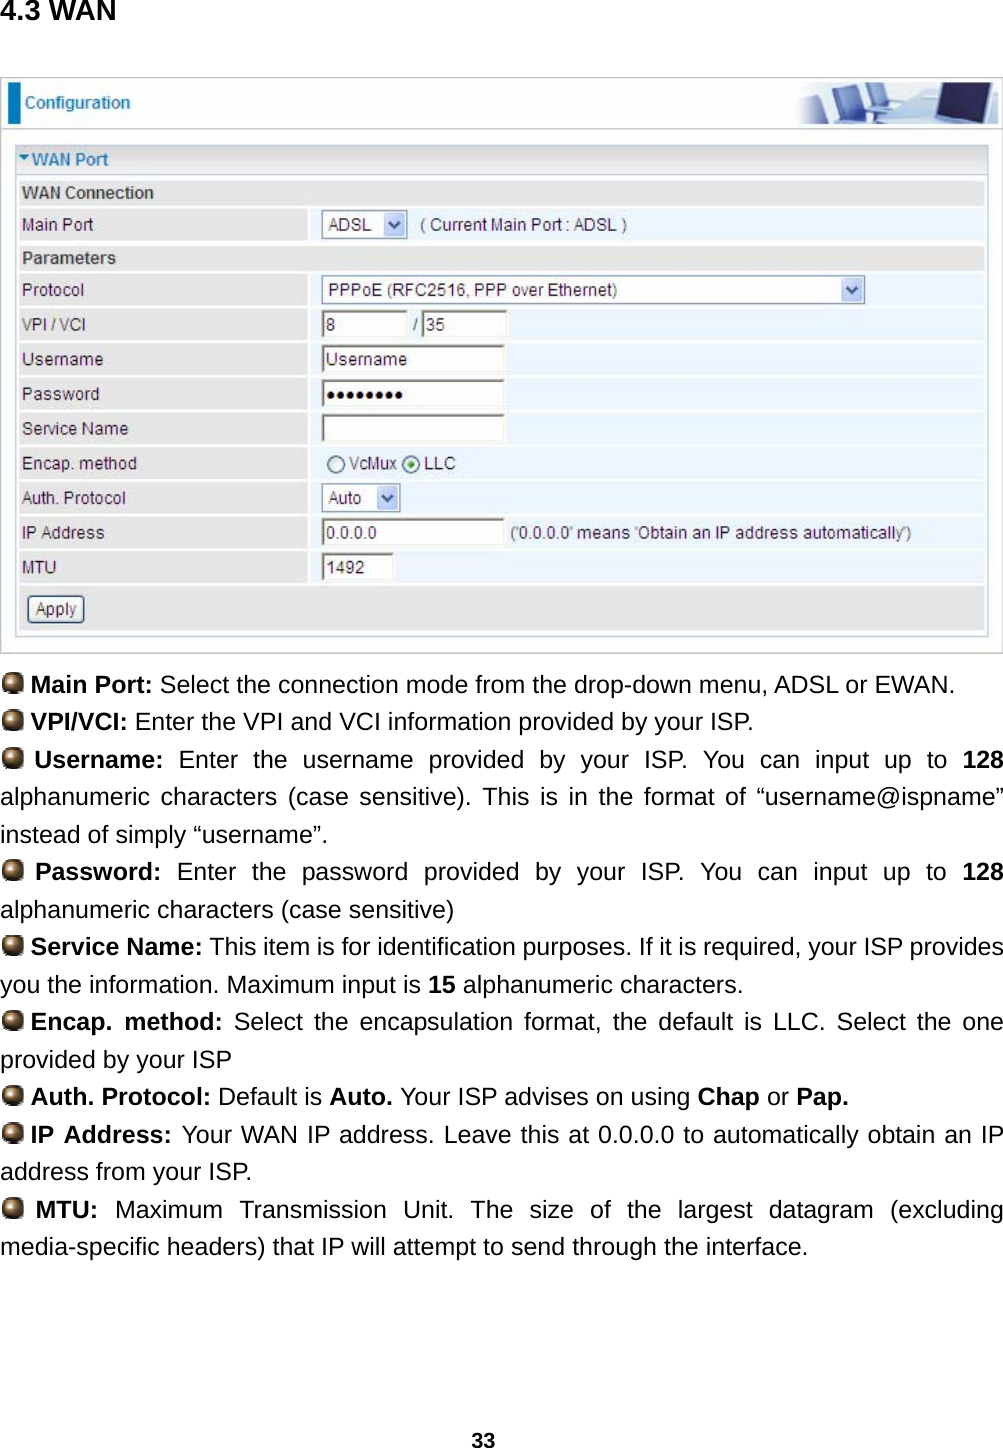 33 4.3 WAN   Main Port: Select the connection mode from the drop-down menu, ADSL or EWAN.  VPI/VCI: Enter the VPI and VCI information provided by your ISP.   Username: Enter the username provided by your ISP. You can input up to 128 alphanumeric characters (case sensitive). This is in the format of “username@ispname” instead of simply “username”.  Password: Enter the password provided by your ISP. You can input up to 128 alphanumeric characters (case sensitive)  Service Name: This item is for identification purposes. If it is required, your ISP provides you the information. Maximum input is 15 alphanumeric characters.  Encap.  method: Select the encapsulation format, the default is LLC. Select the one provided by your ISP  Auth. Protocol: Default is Auto. Your ISP advises on using Chap or Pap.  IP Address: Your WAN IP address. Leave this at 0.0.0.0 to automatically obtain an IP address from your ISP.  MTU:  Maximum Transmission Unit. The size of the largest datagram (excluding media-specific headers) that IP will attempt to send through the interface.  